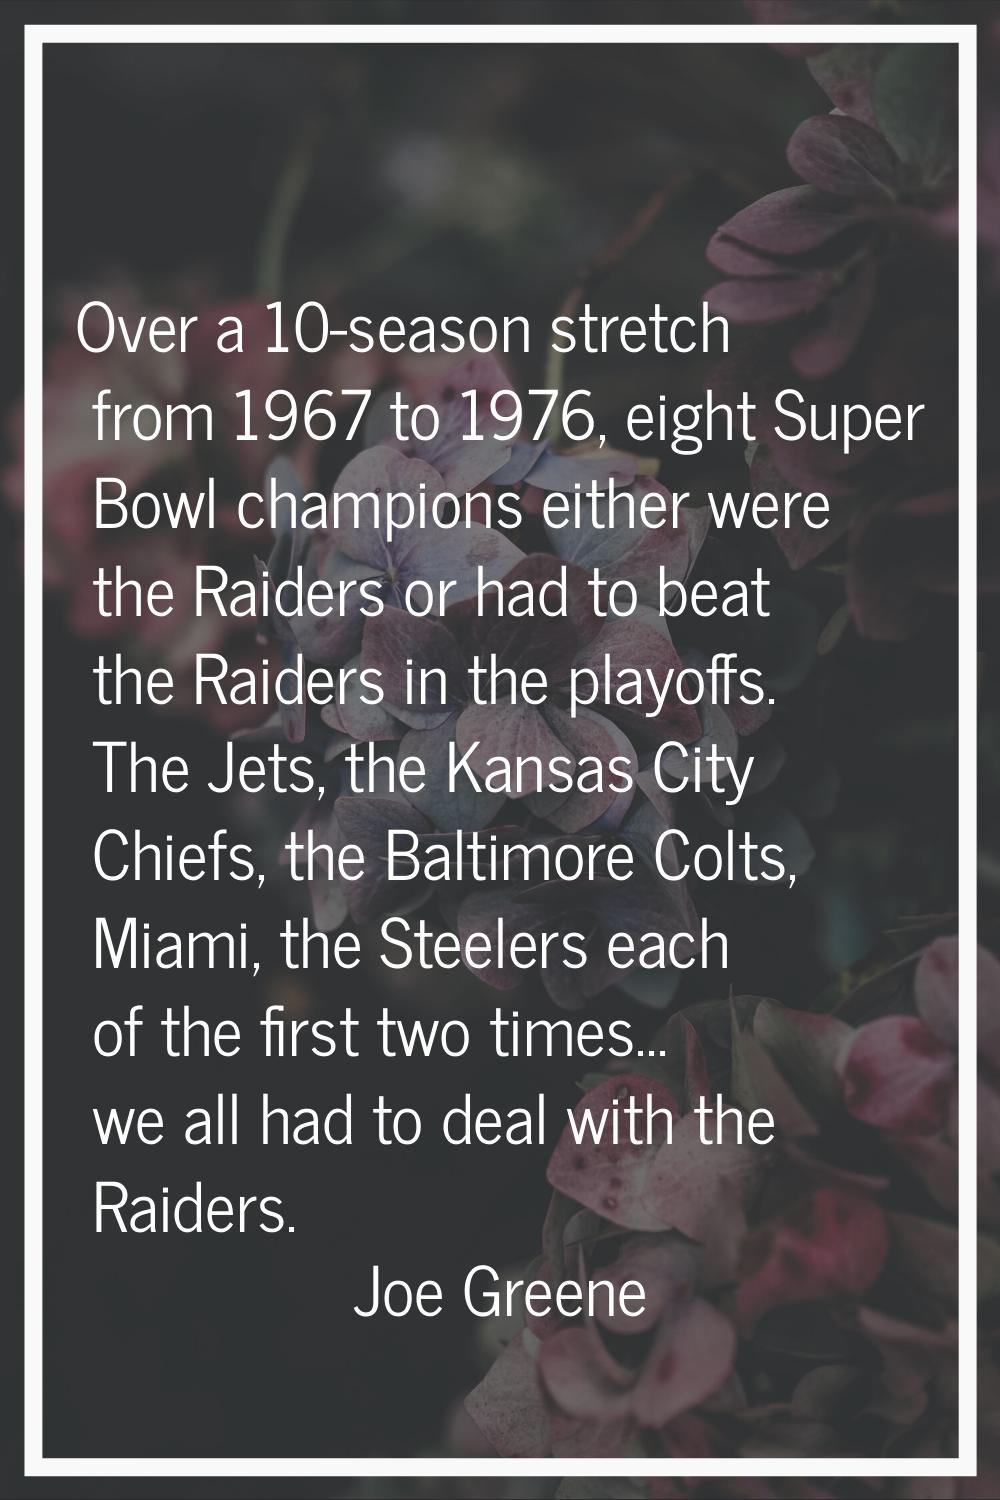 Over a 10-season stretch from 1967 to 1976, eight Super Bowl champions either were the Raiders or h